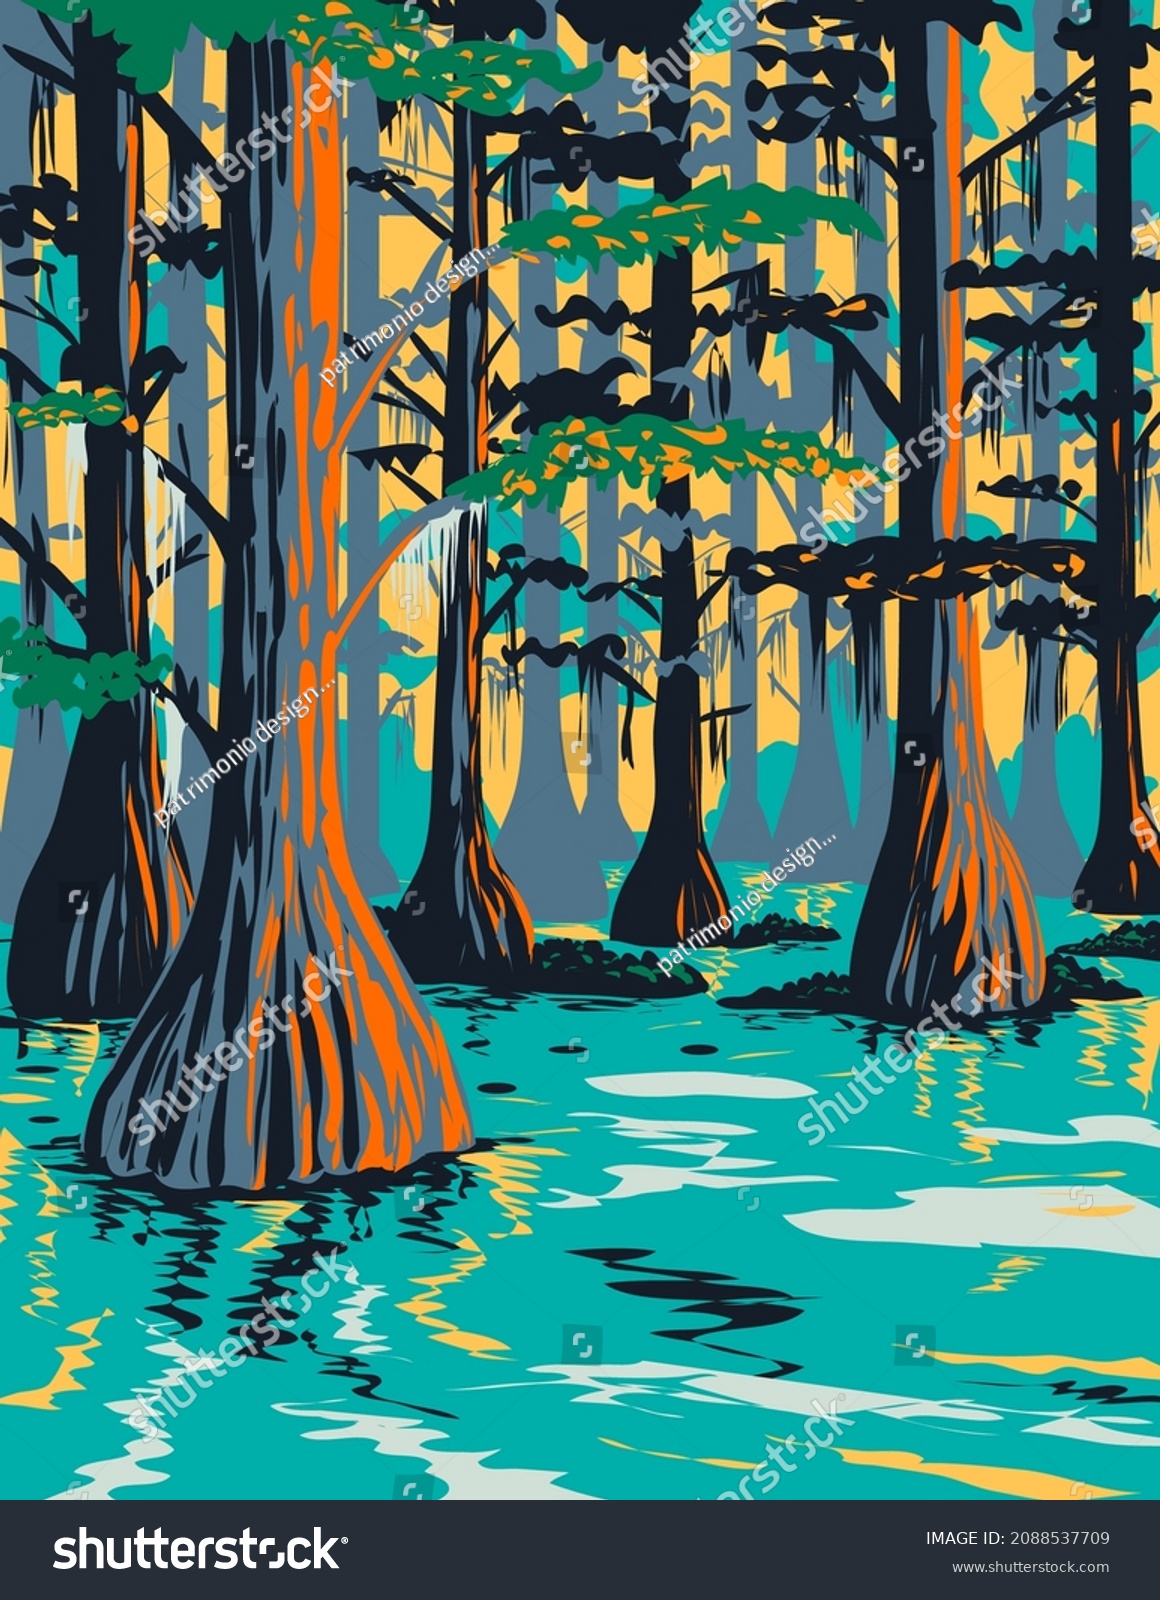 SVG of WPA poster art of Caddo Lake State Park with bald cypress trees on lake and bayou in Harrison and Marion County East Texas, United States of America USA done in works project administration style. svg